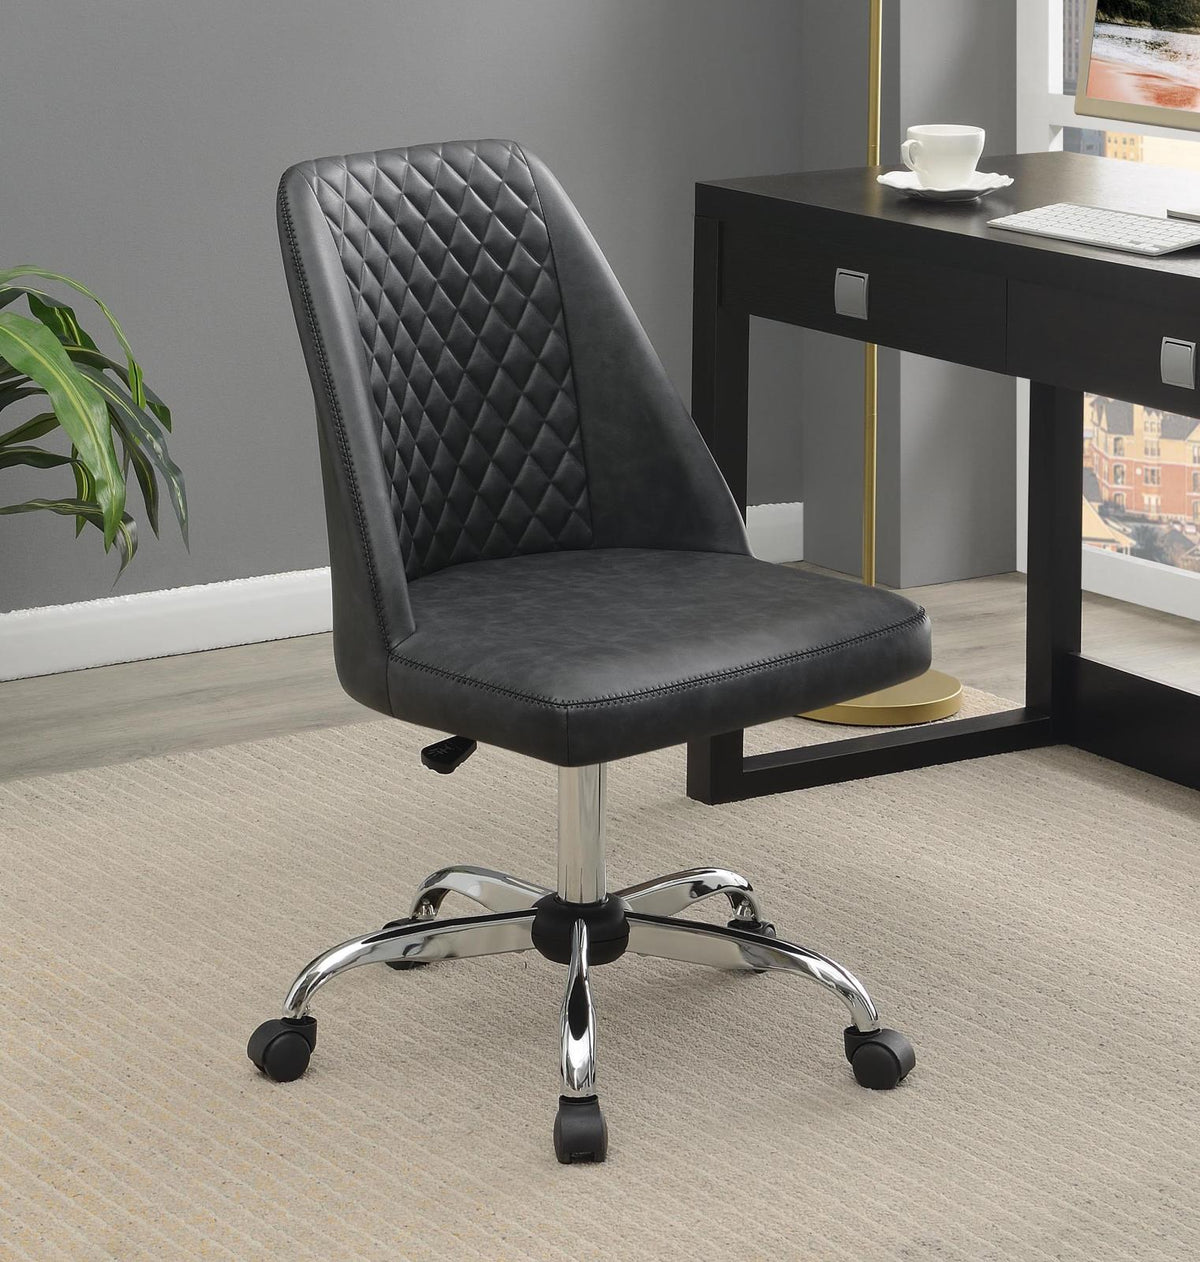 Althea Upholstered Tufted Back Office Chair Grey and Chrome - Half Price Furniture